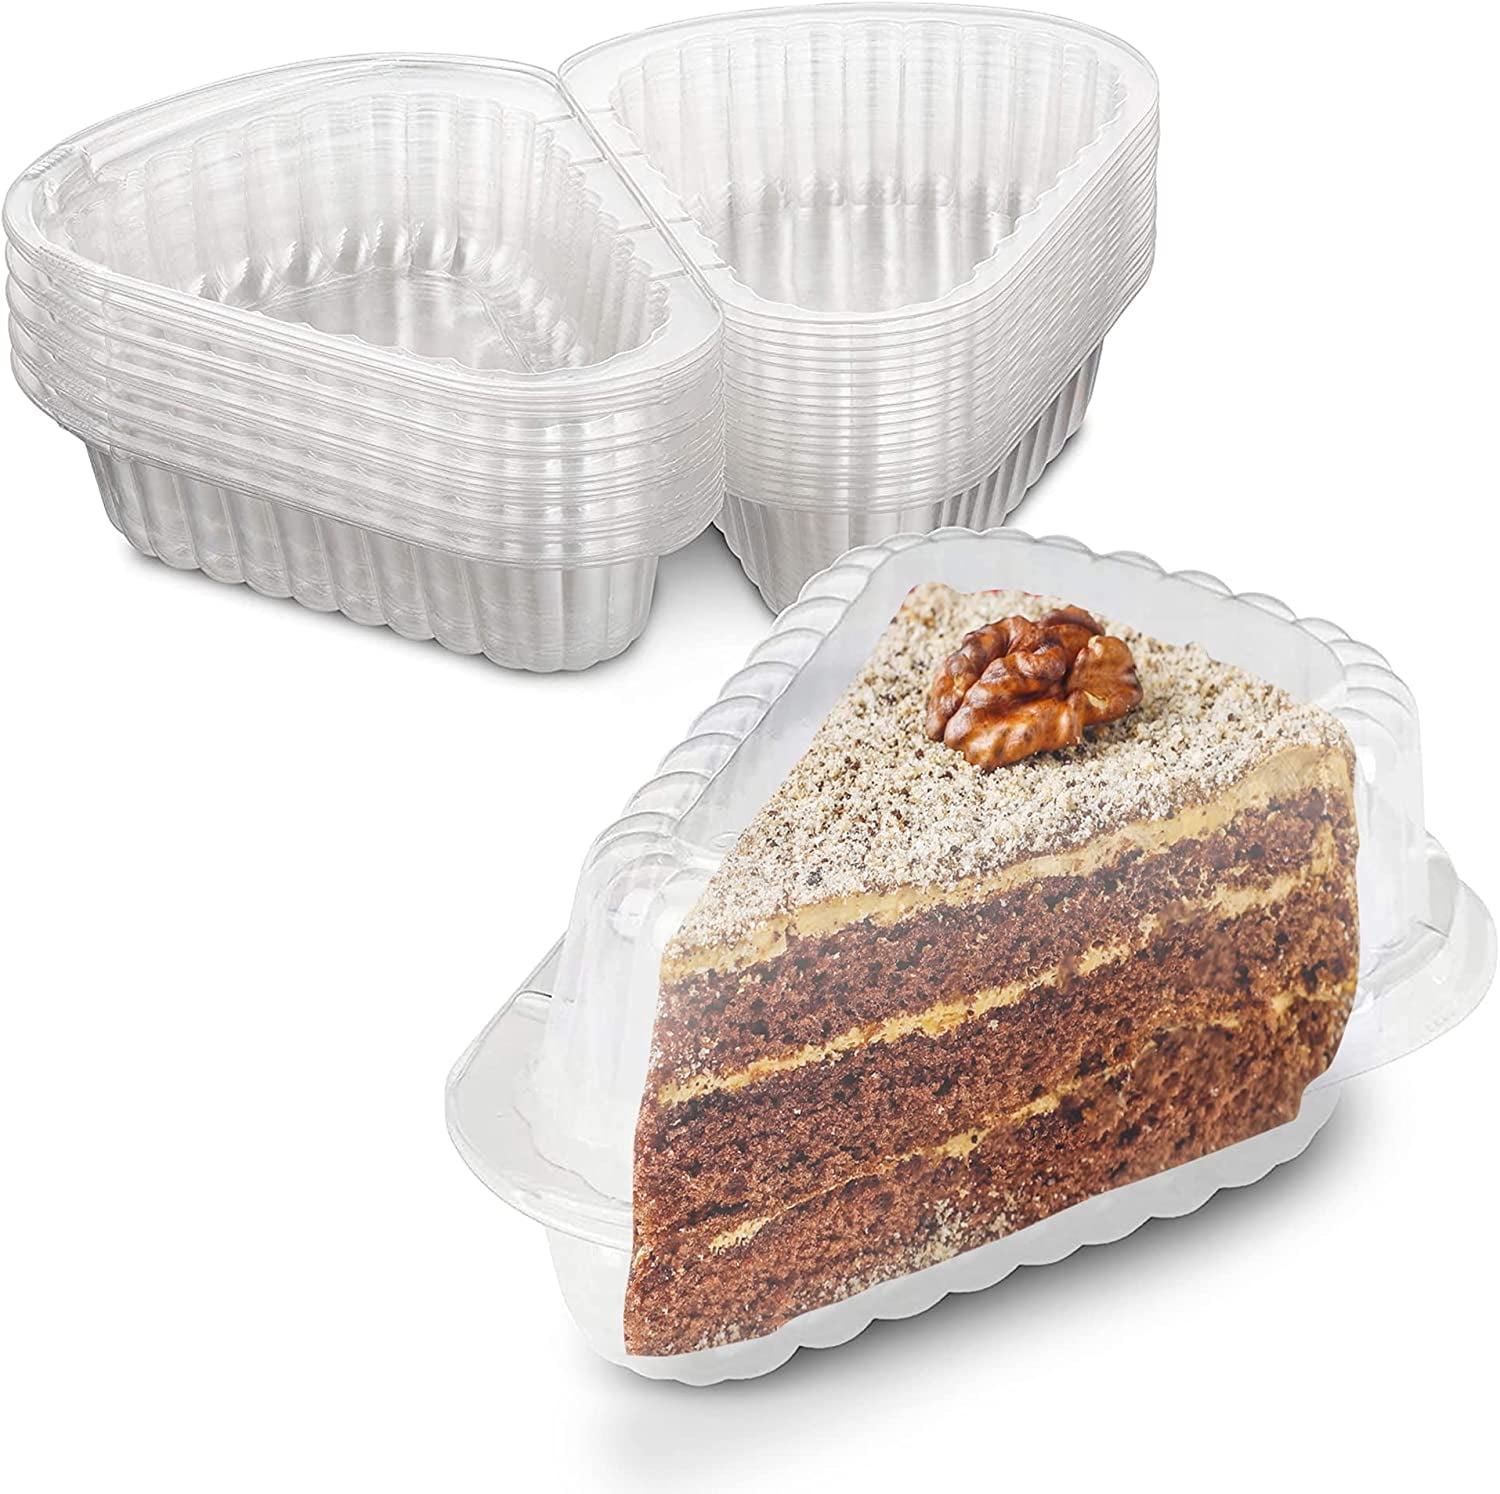  10-11 Plastic Disposable Cake Containers Carriers with Dome  Lids and Cake Boards, 3 Round Cake Carriers for Transport, Clear Bundt  Cake Boxes/Cover